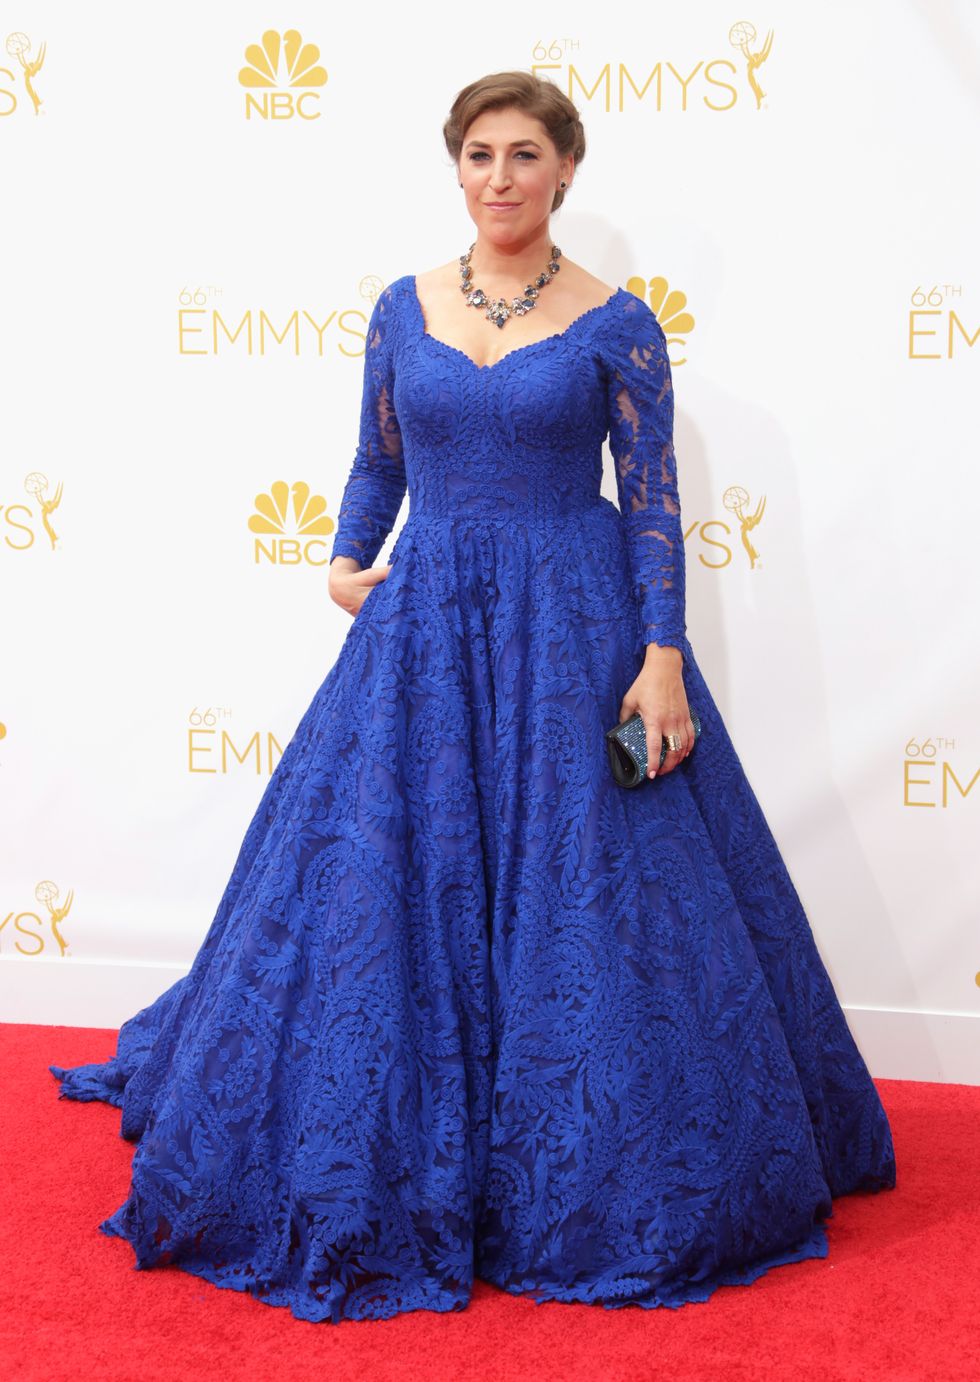 Mayim Bialik looks beautiful in blue at the Primetime Emmy Awards